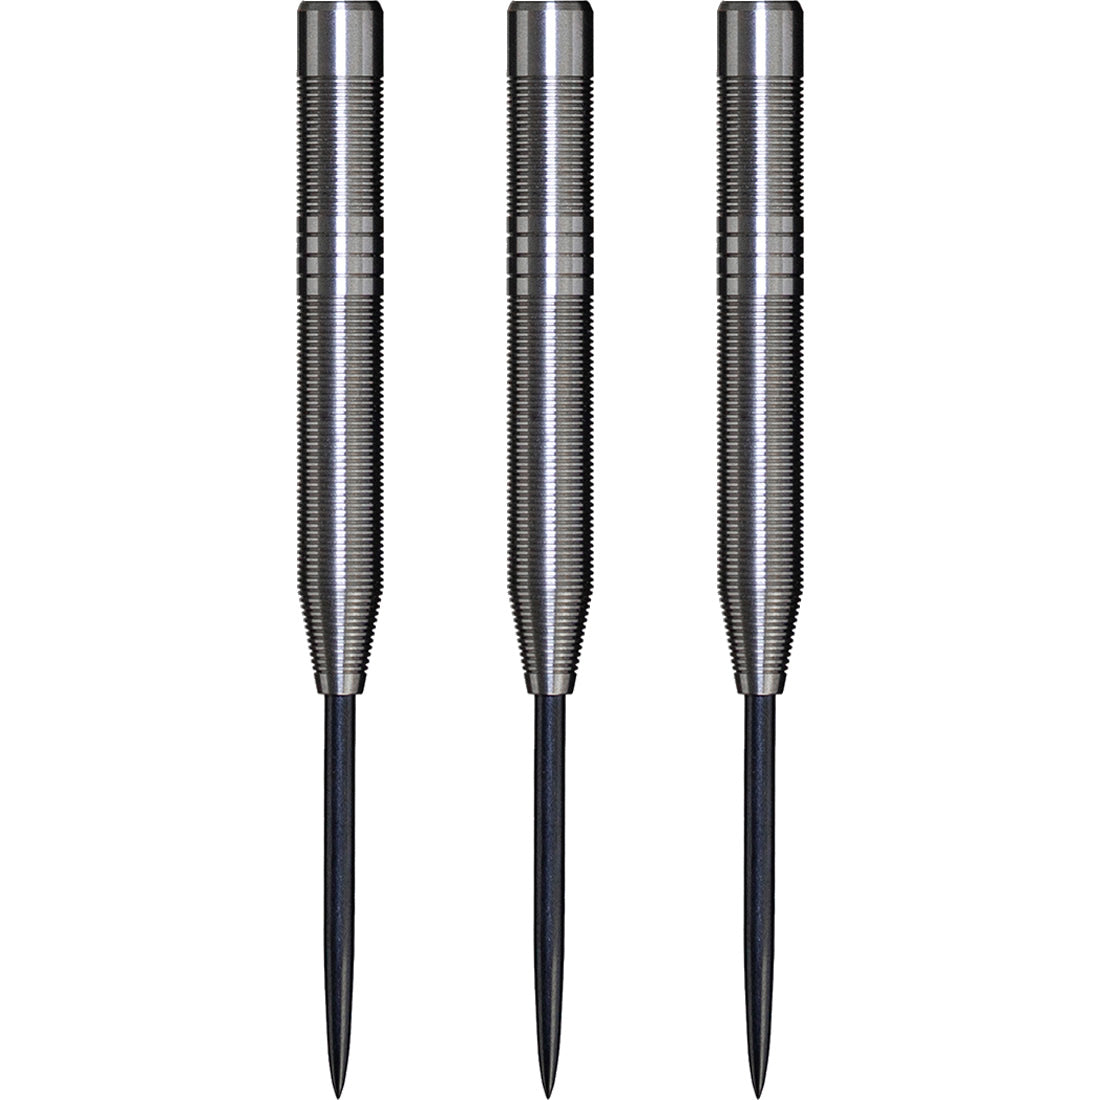 Cosmo Darts - Discovery Label - Steel Tip - Ross Snook - Micro Ring - 23g